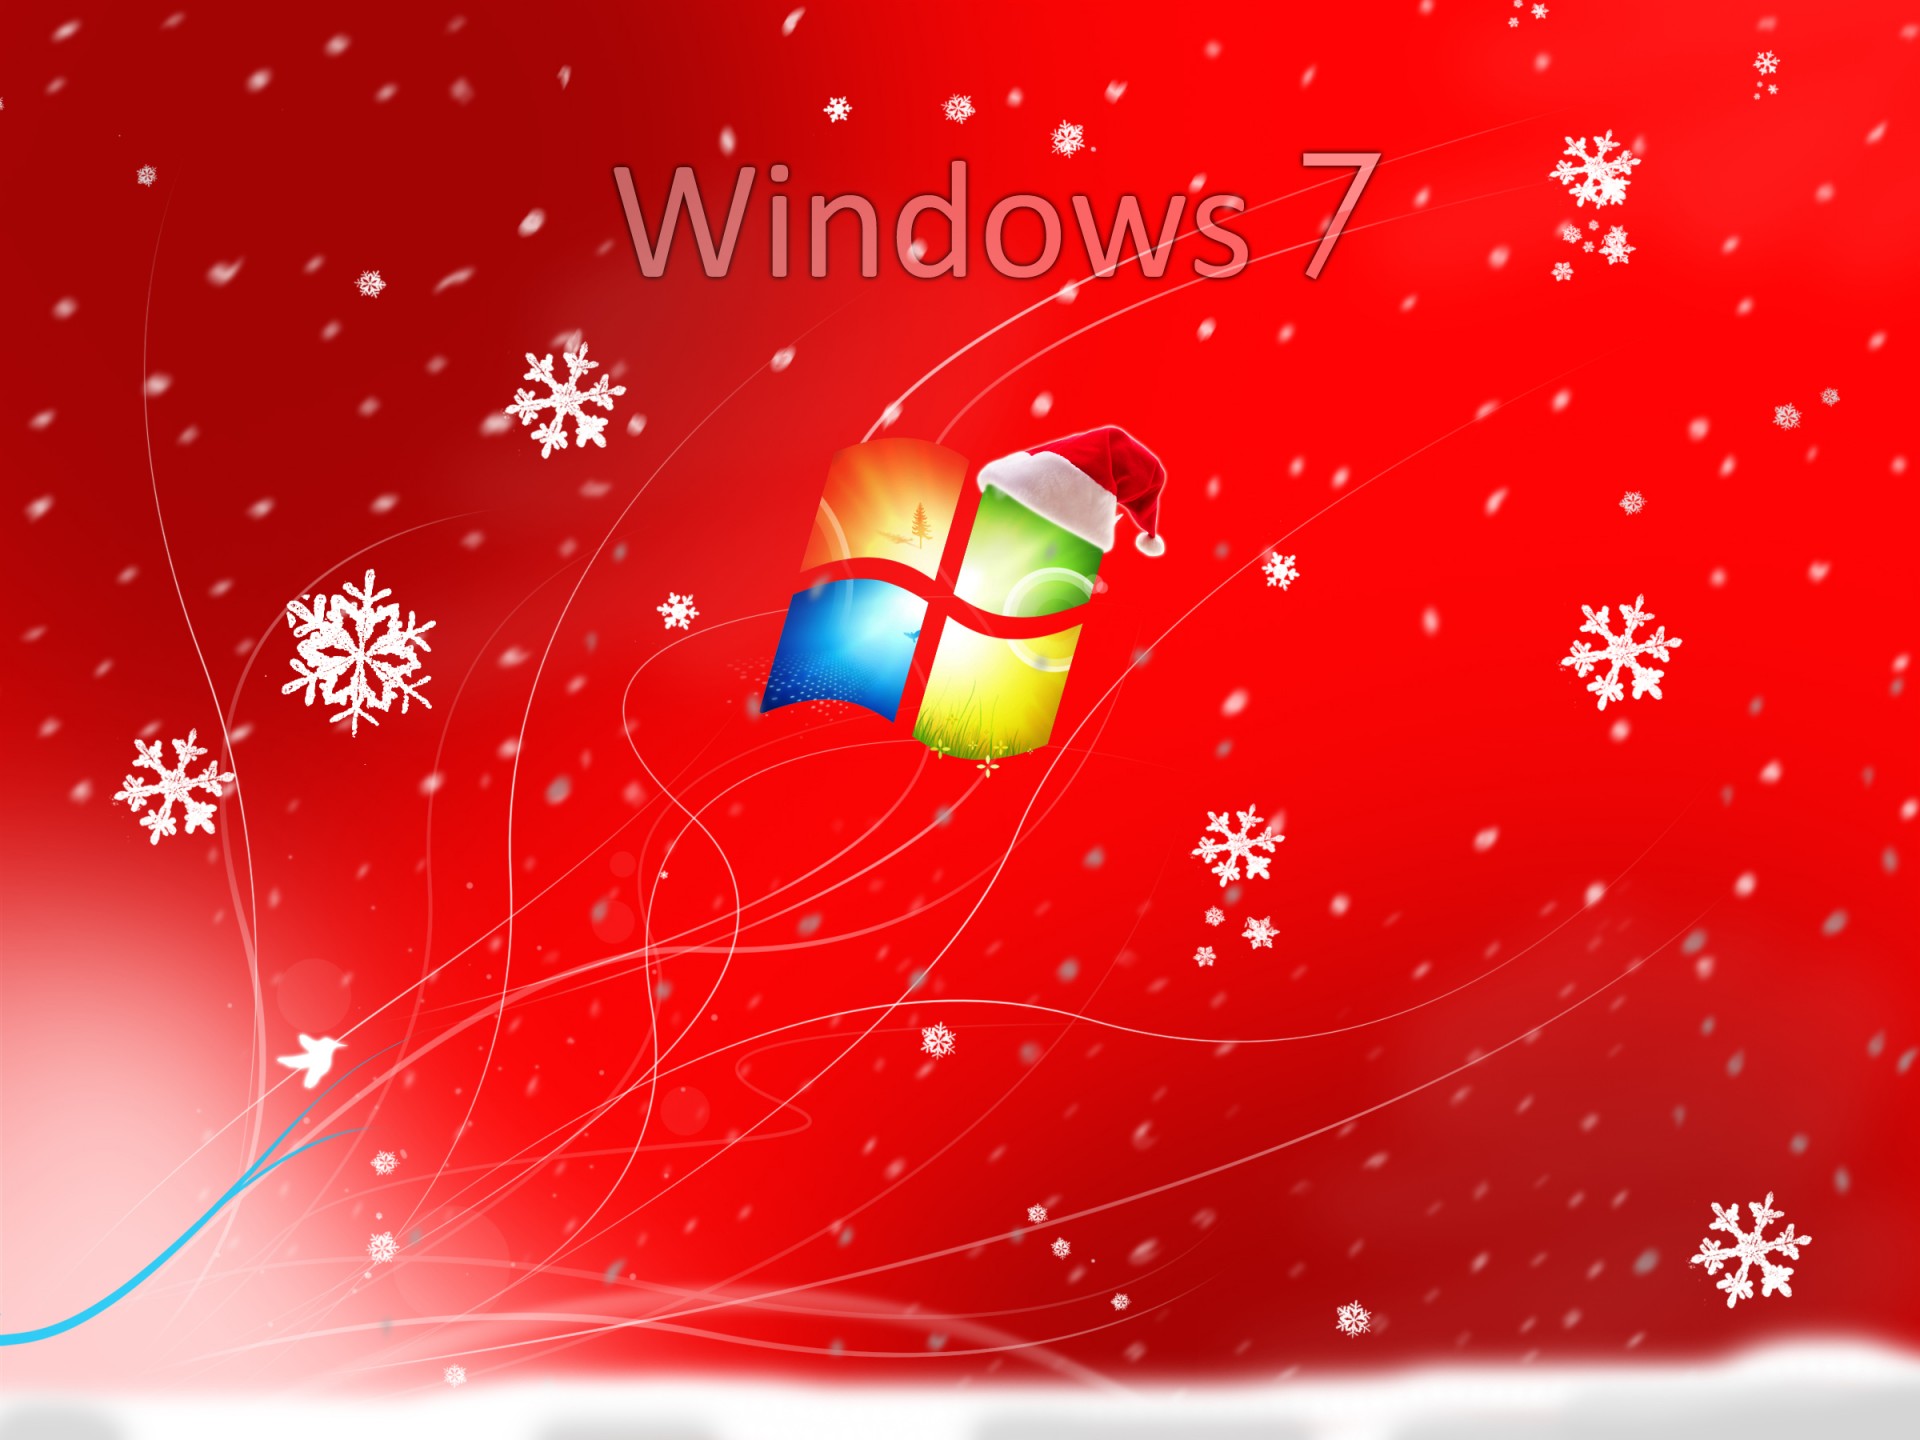 Christmas Wallpaper Live For Windows 7 | Wallpapers9